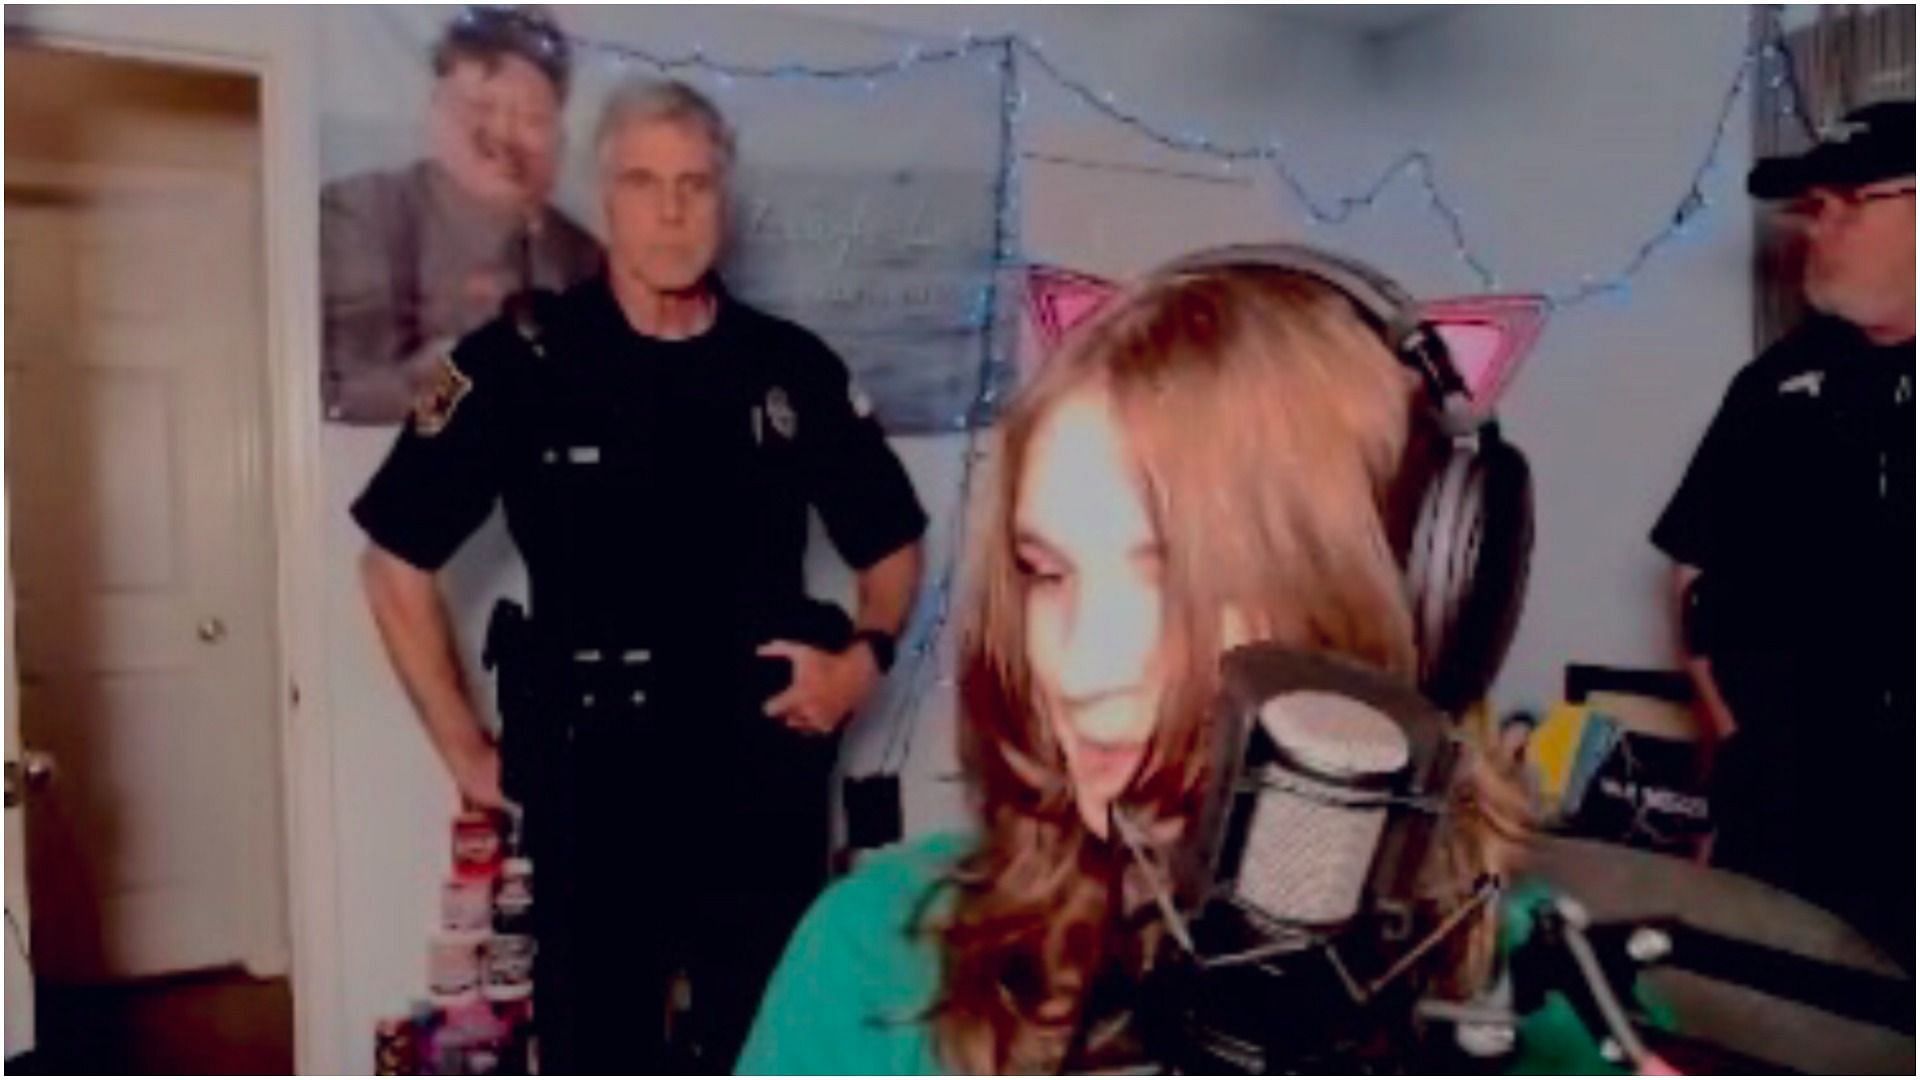 16-year-old Twitch streamer VioWynn was detained by police mid-stream (Image via Keffals/Instagram)